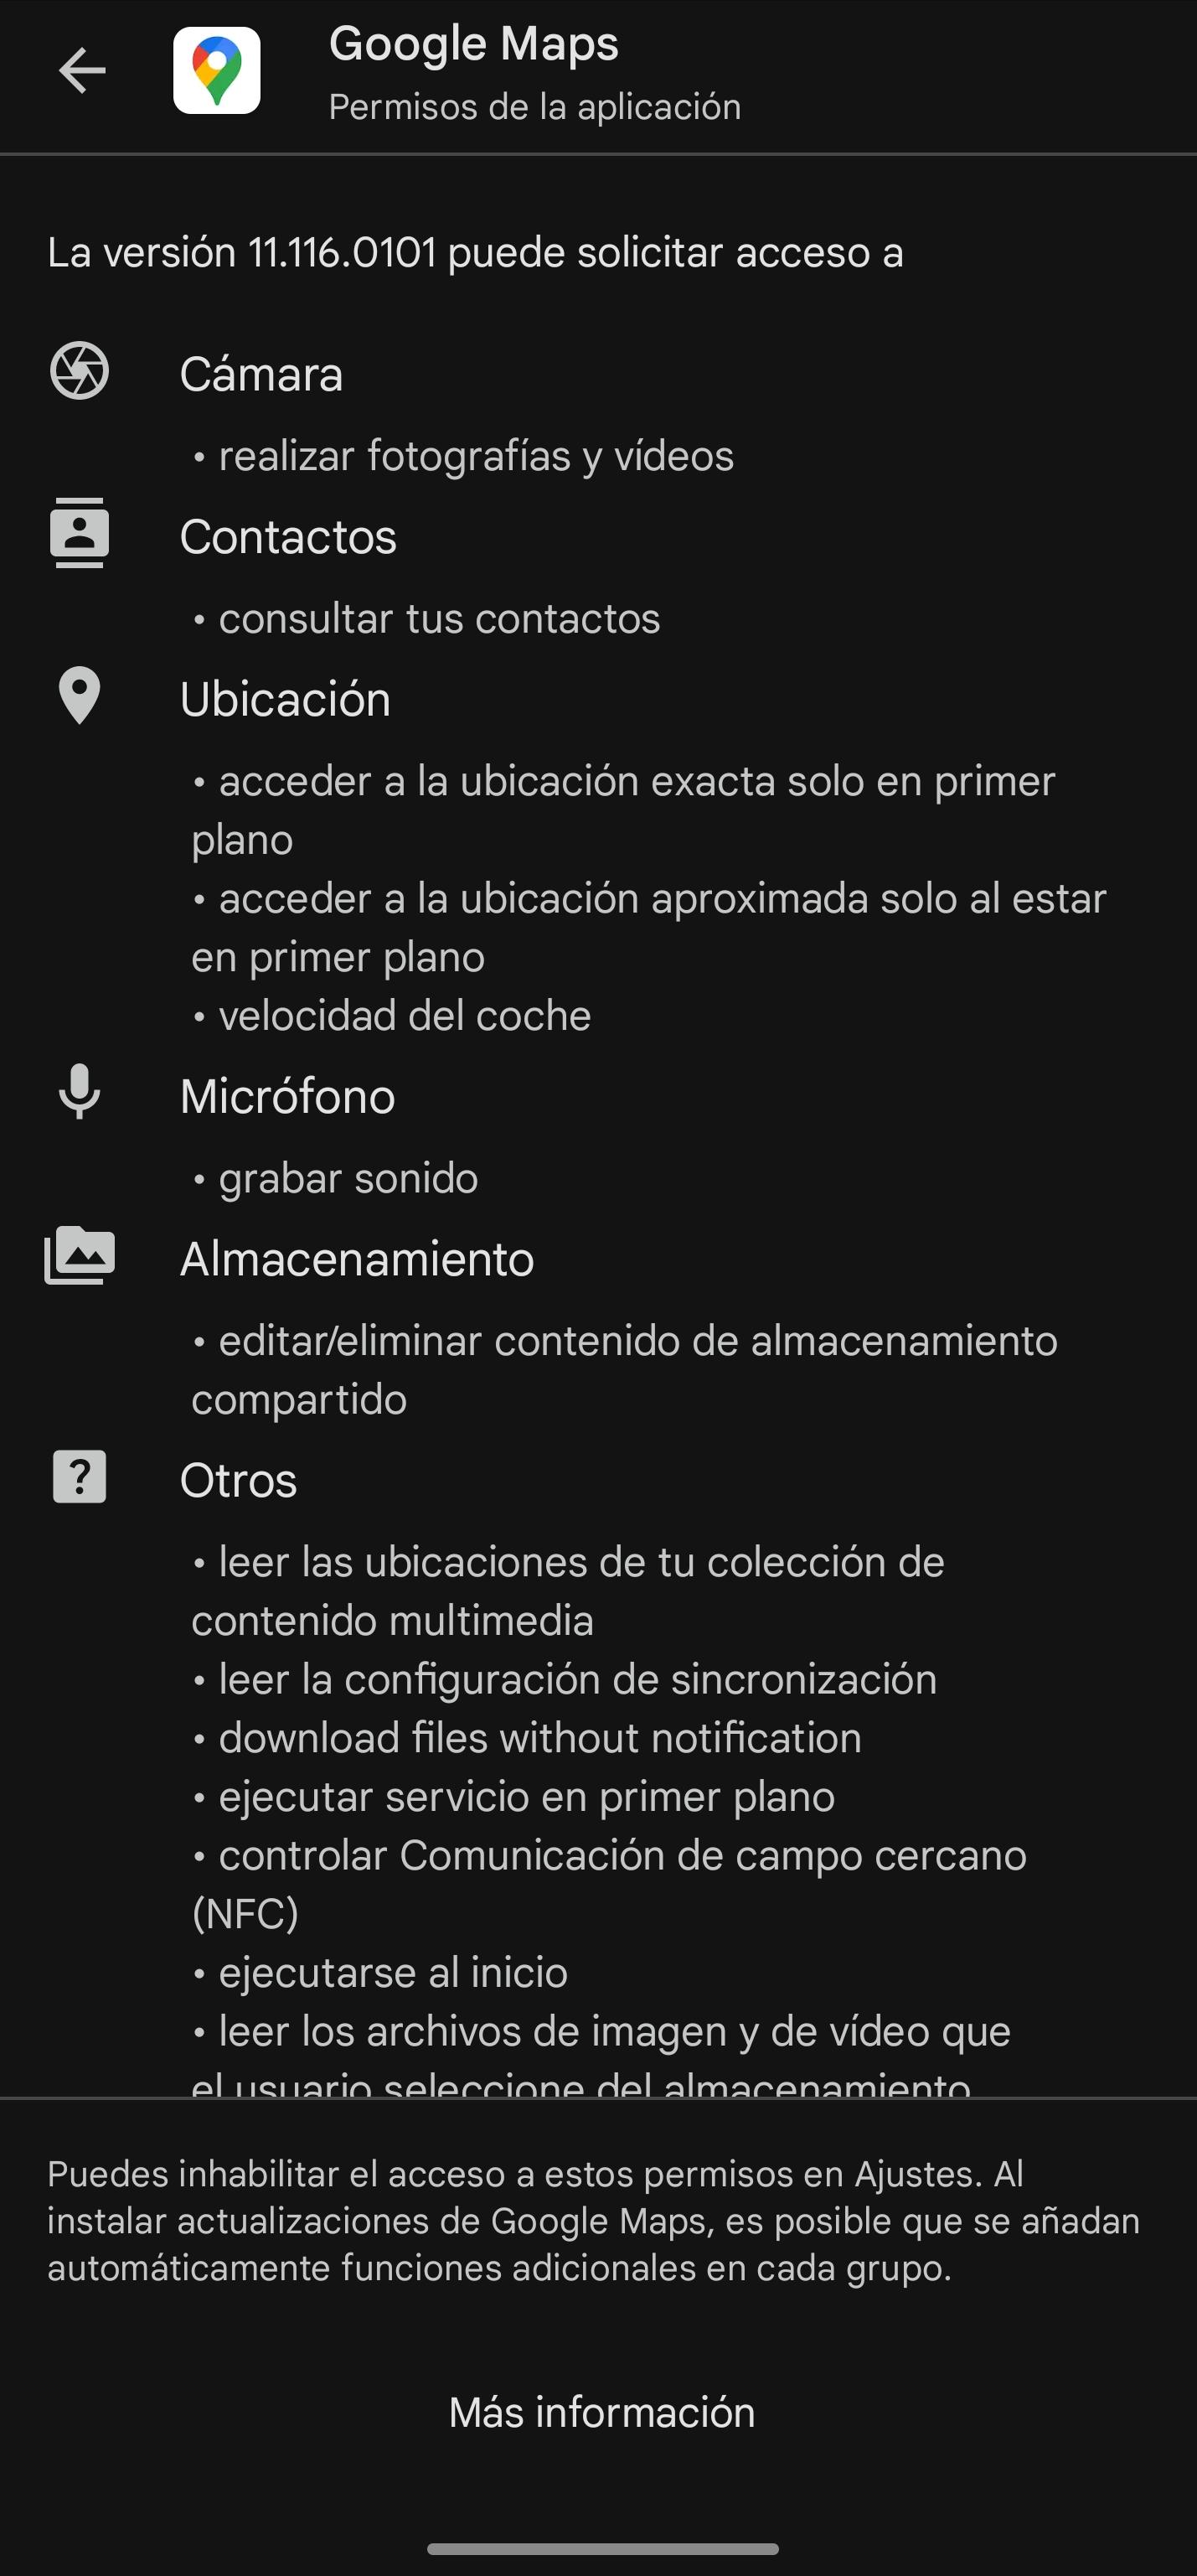 Application permissions how to change